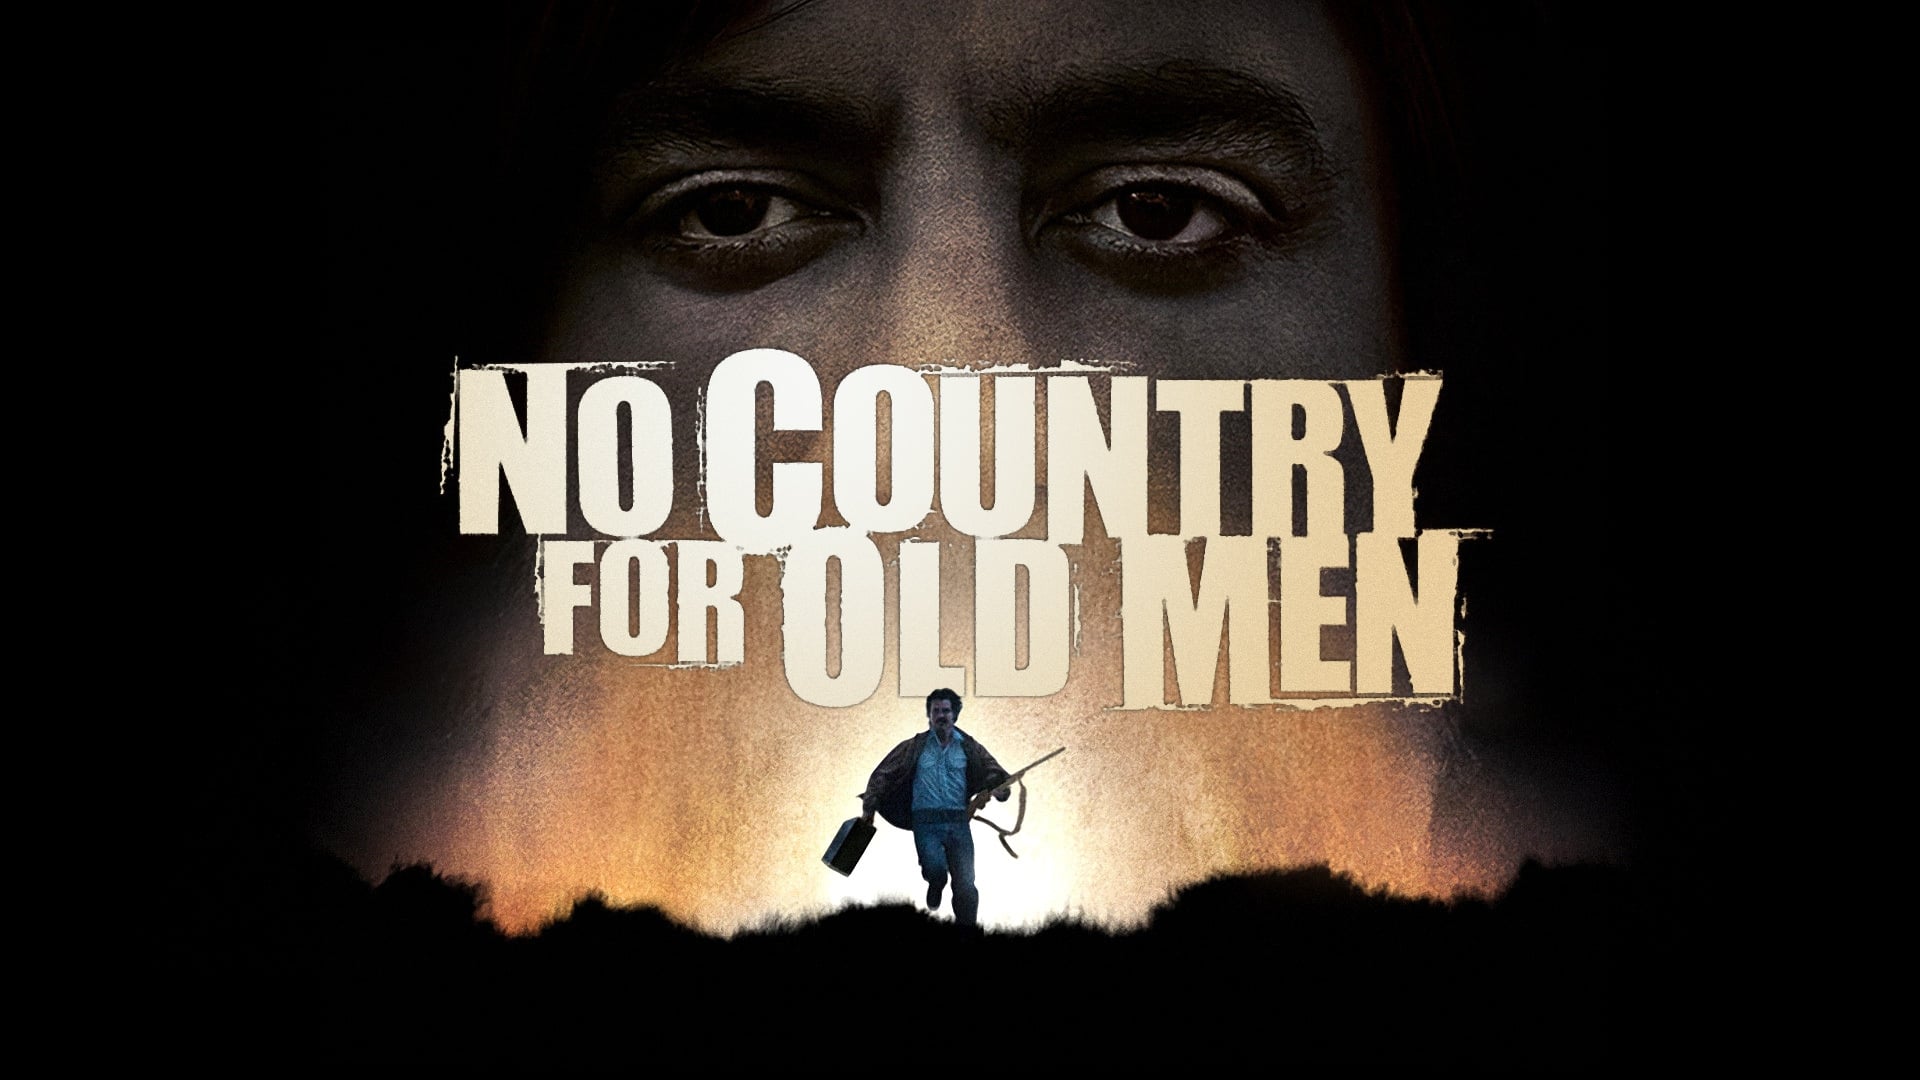 Media - No Country for Old Men (Movie, 2007)